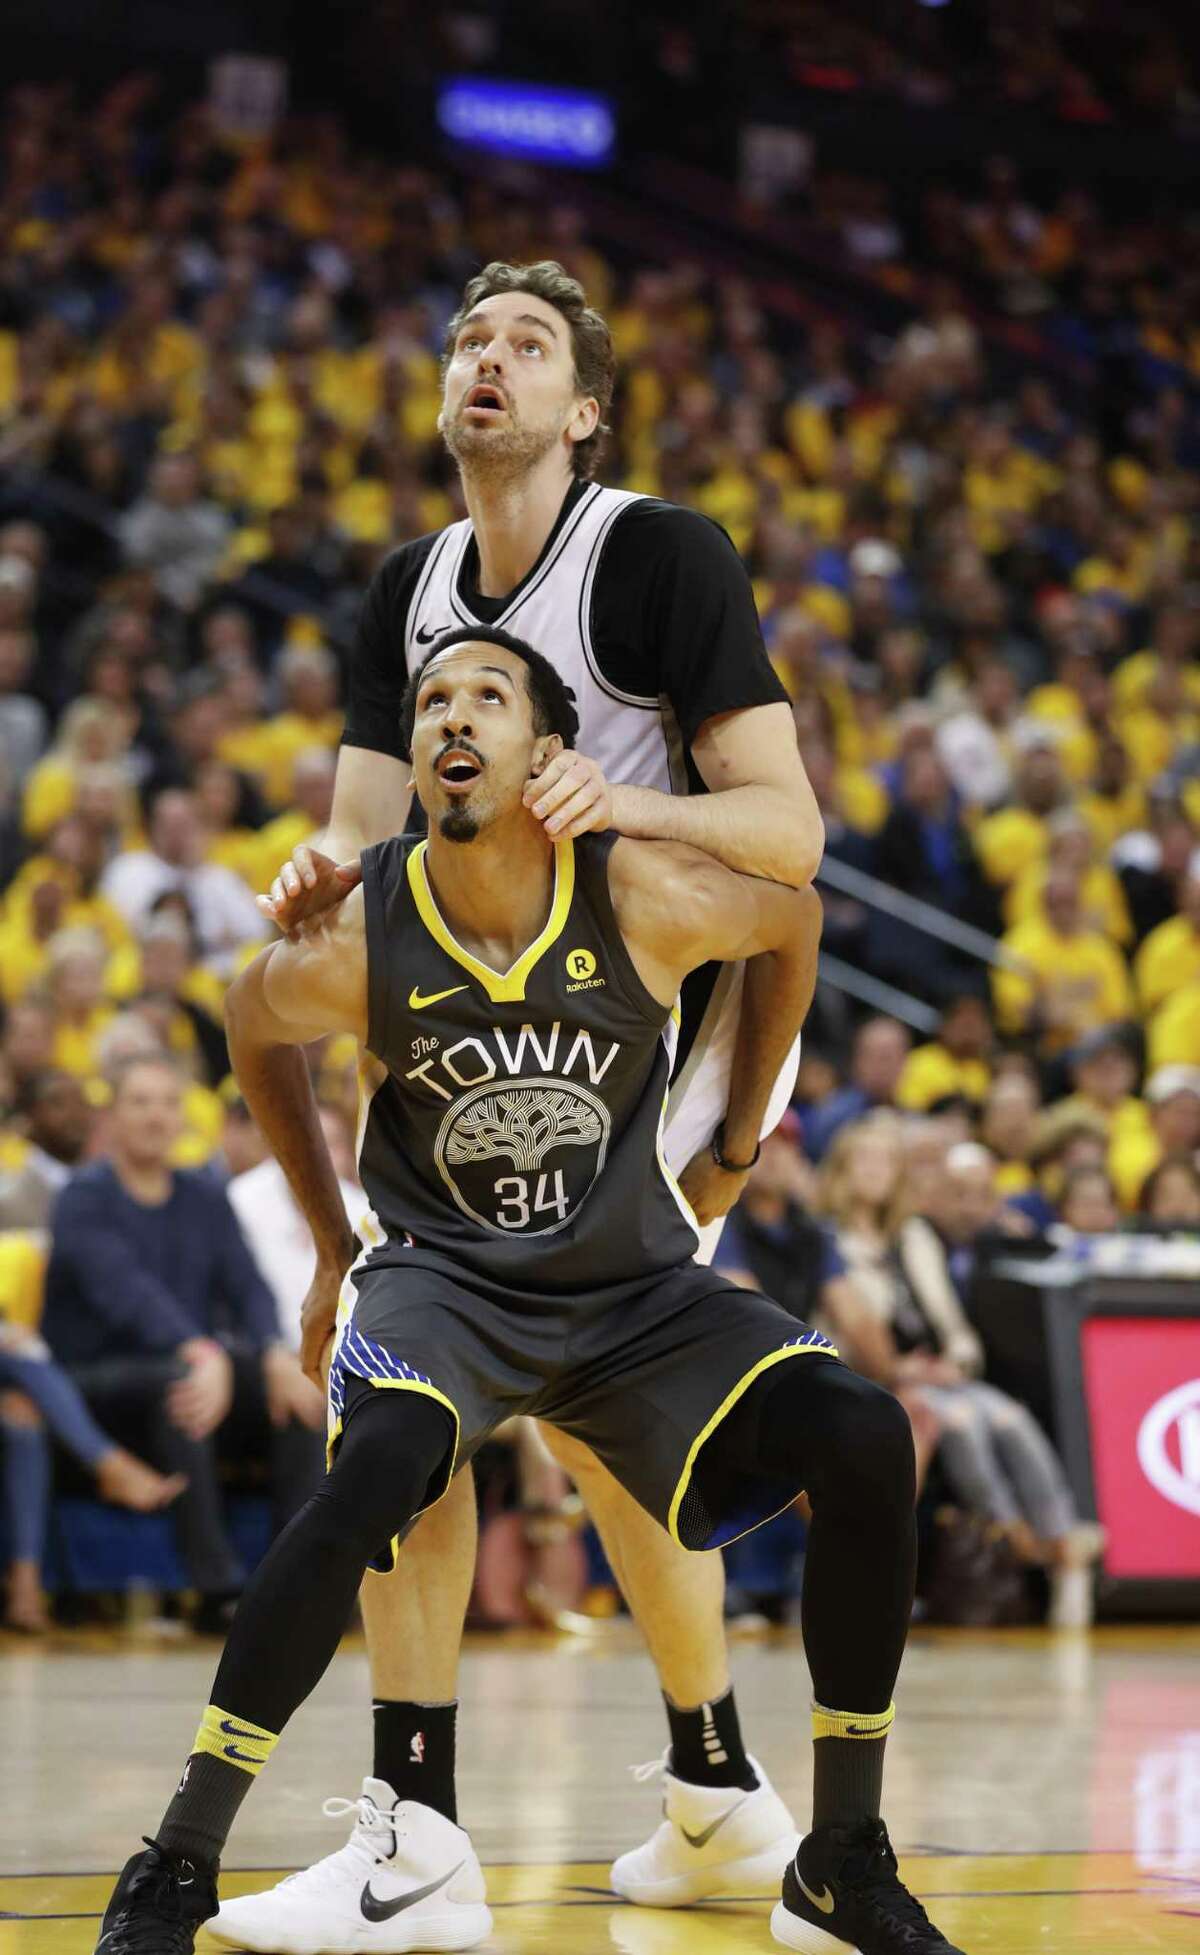 Golden State Warriors' Shaun Livingston and San Antonio Spurs' Pau Gasol fight for rebound position in the first quarter during game 2 of round 1 of the Western Conference Finals at Oracle Arena on Monday, April 16, 2018 in Oakland, Calif.